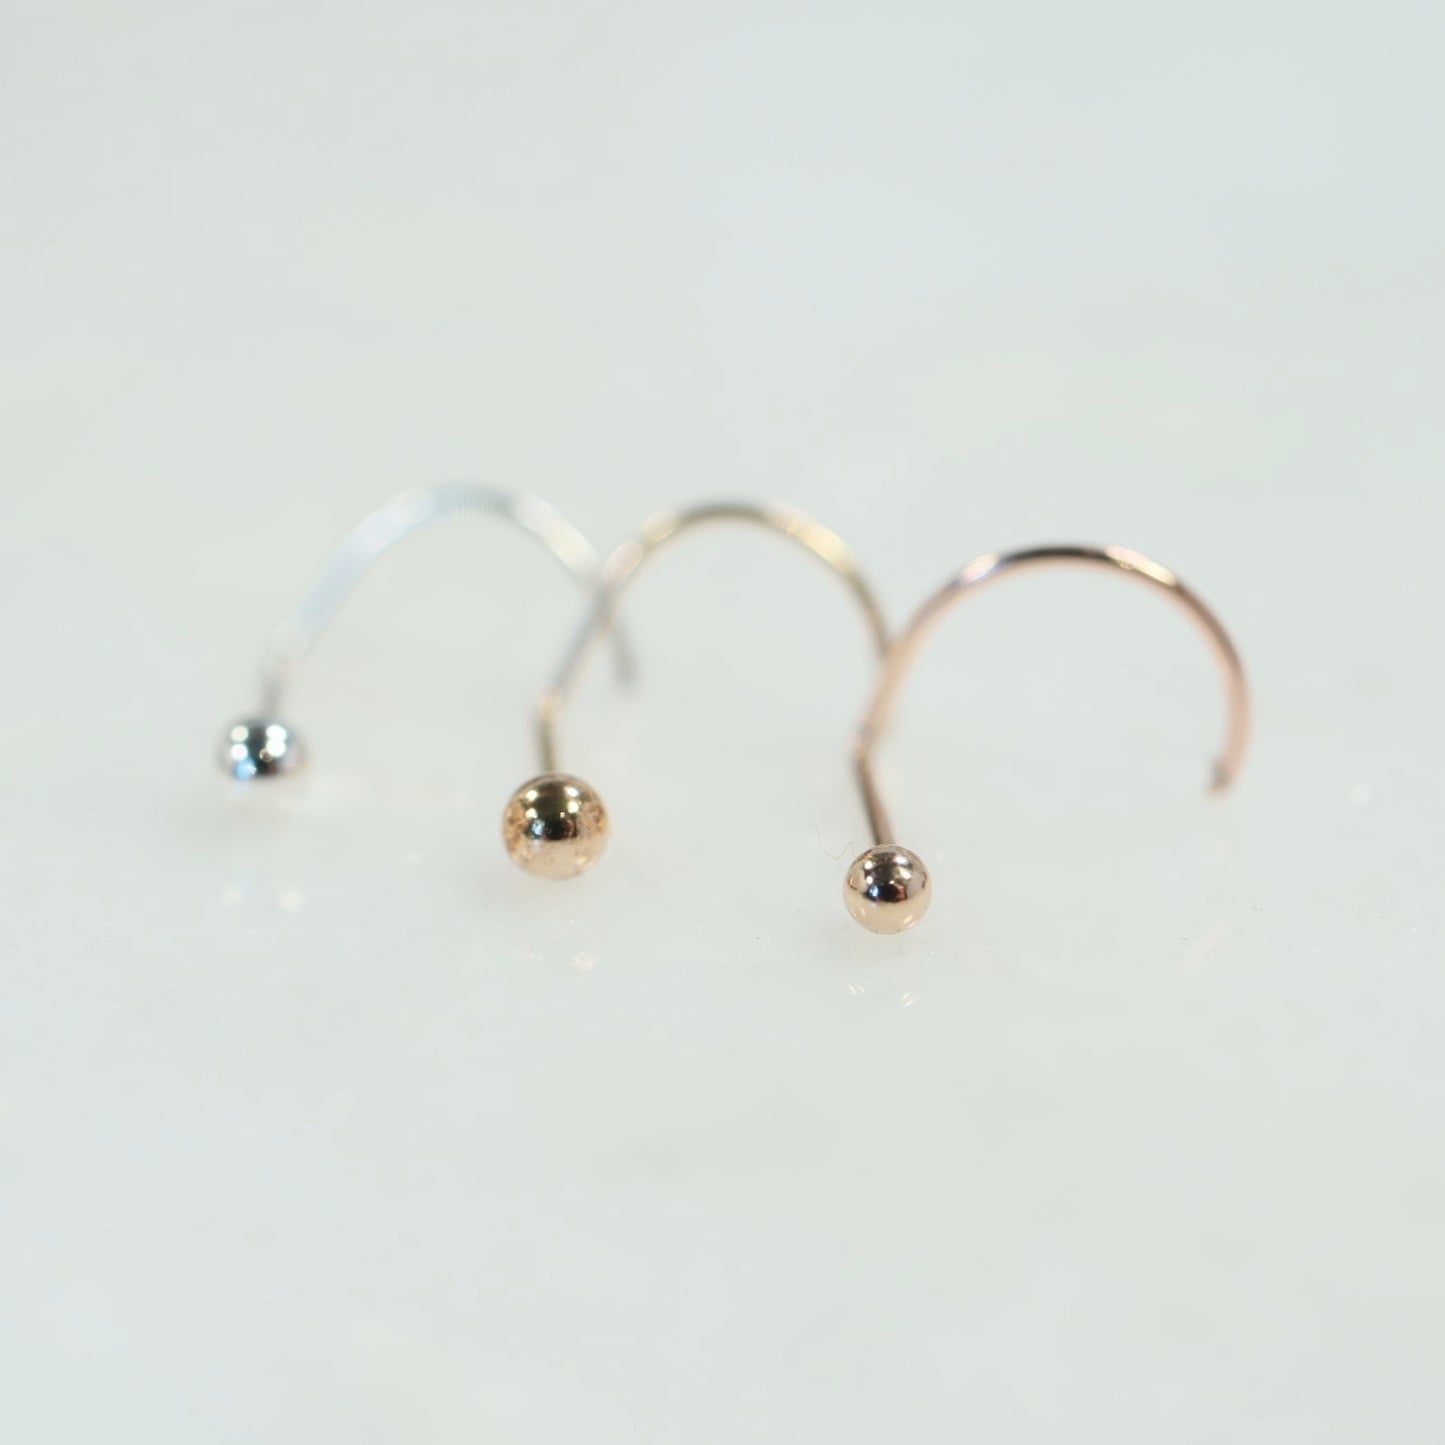 Nose Stud Ball 1mm Choose Your Style and Metal